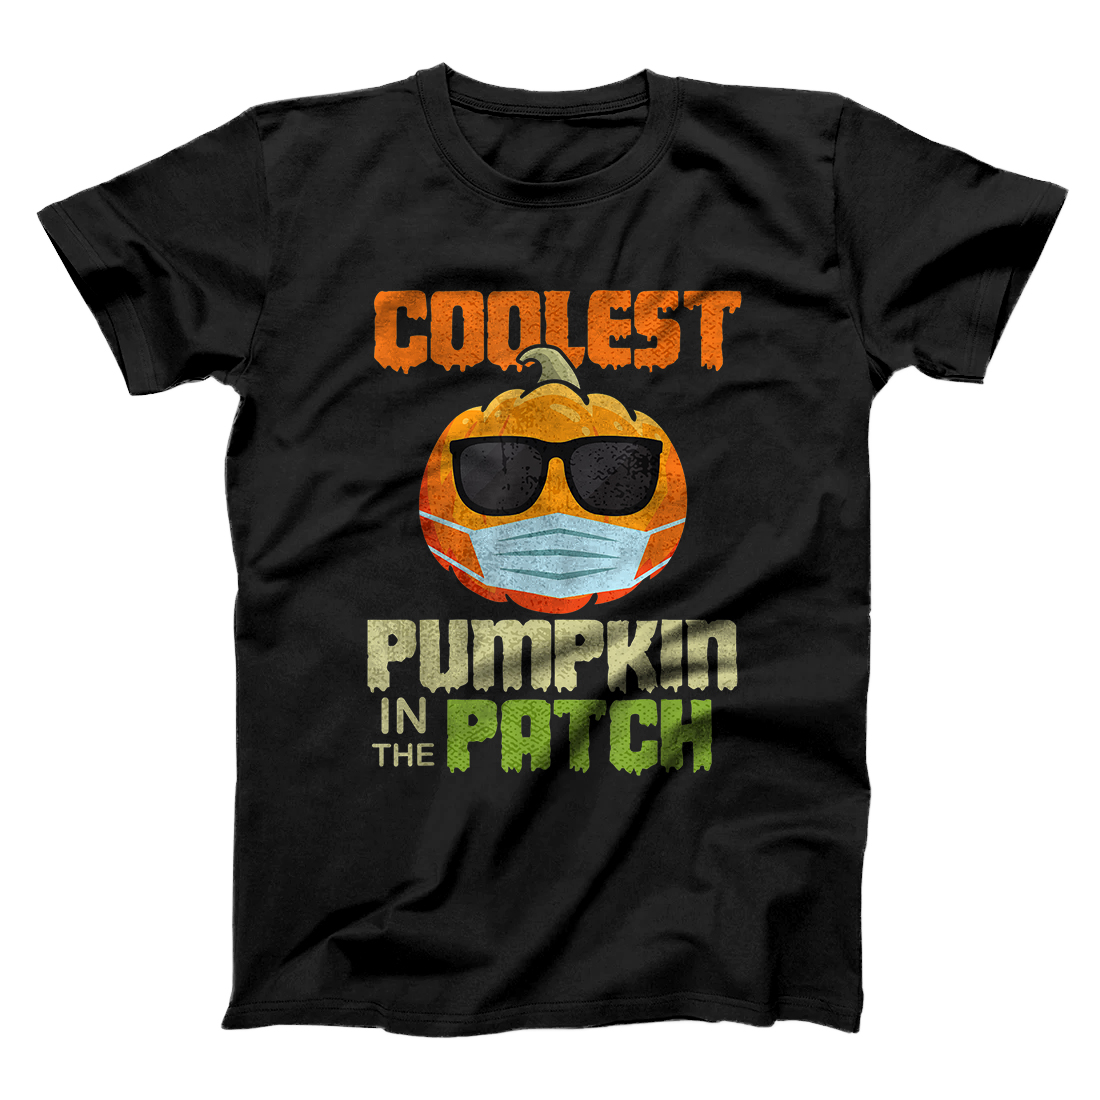 Personalized Coolest Pumpkin In The Patch Halloween Boys Girls Quarantine T-Shirt